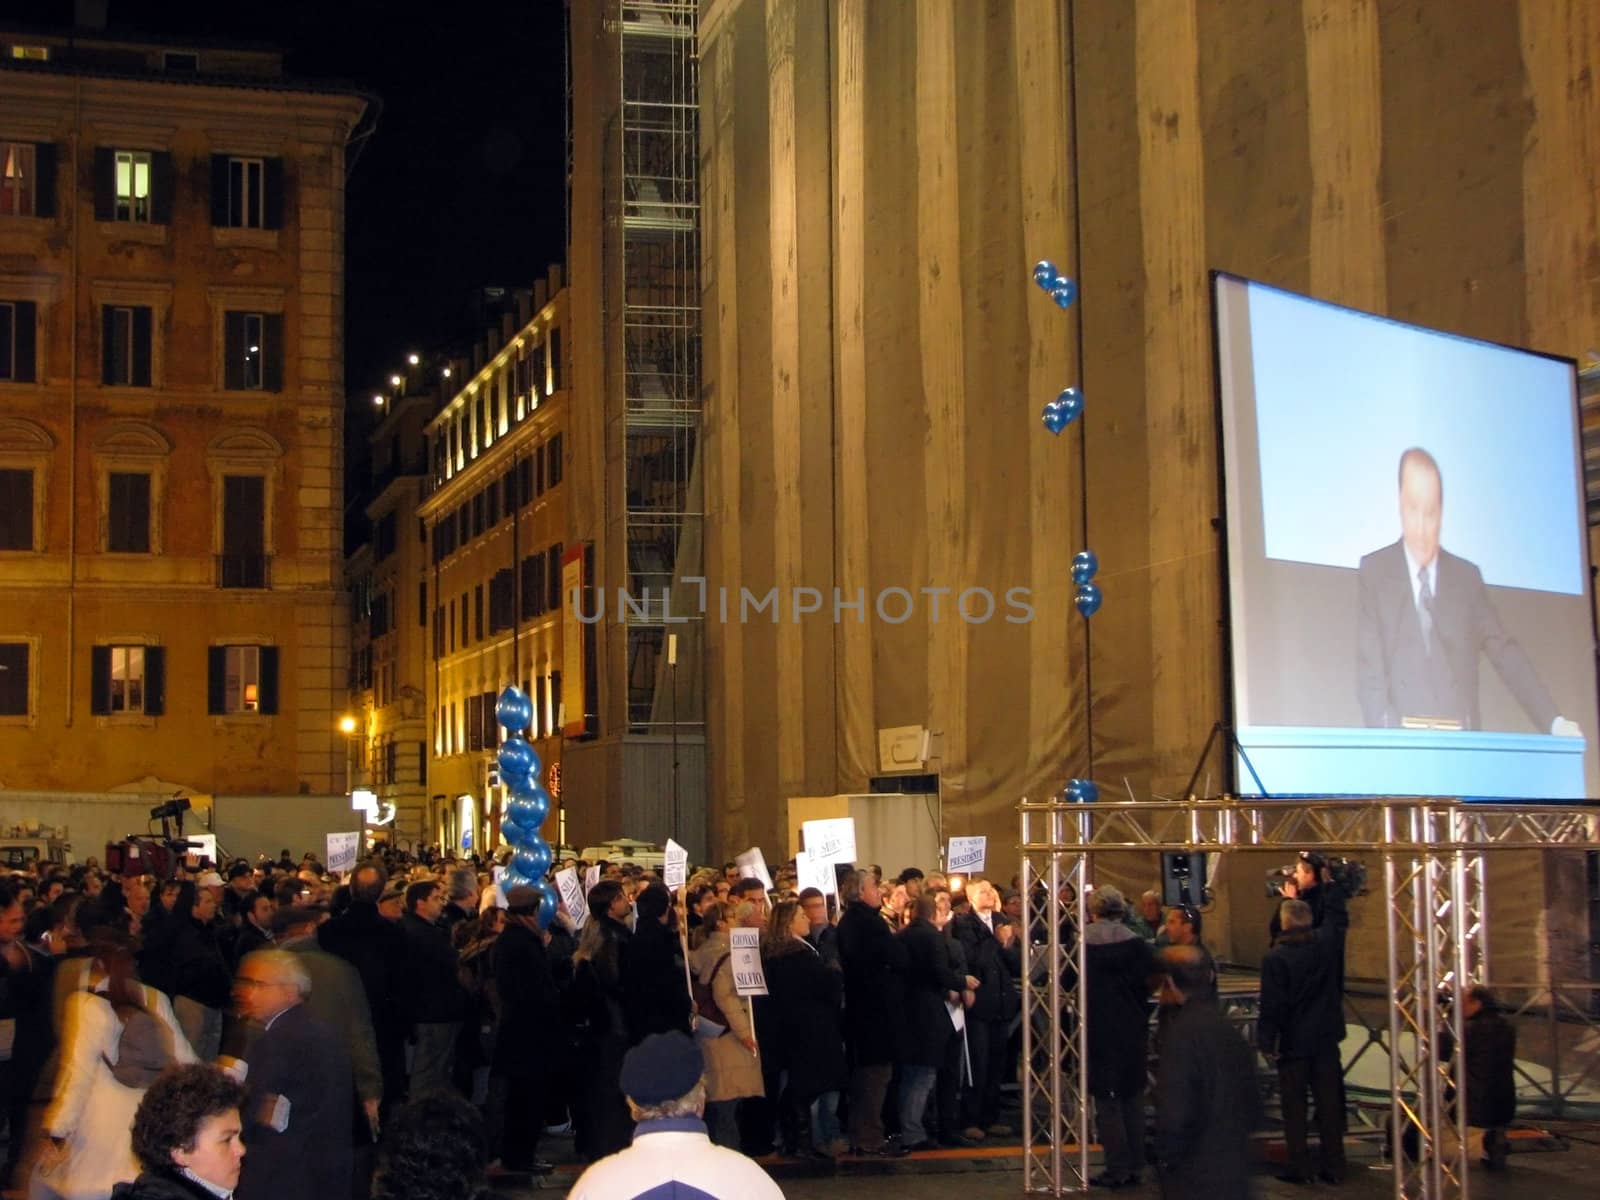 A night time political rally takes place in Rome, Italy. President Silvio is projected on the screen outside. He was speaking inside the building behind the screen.